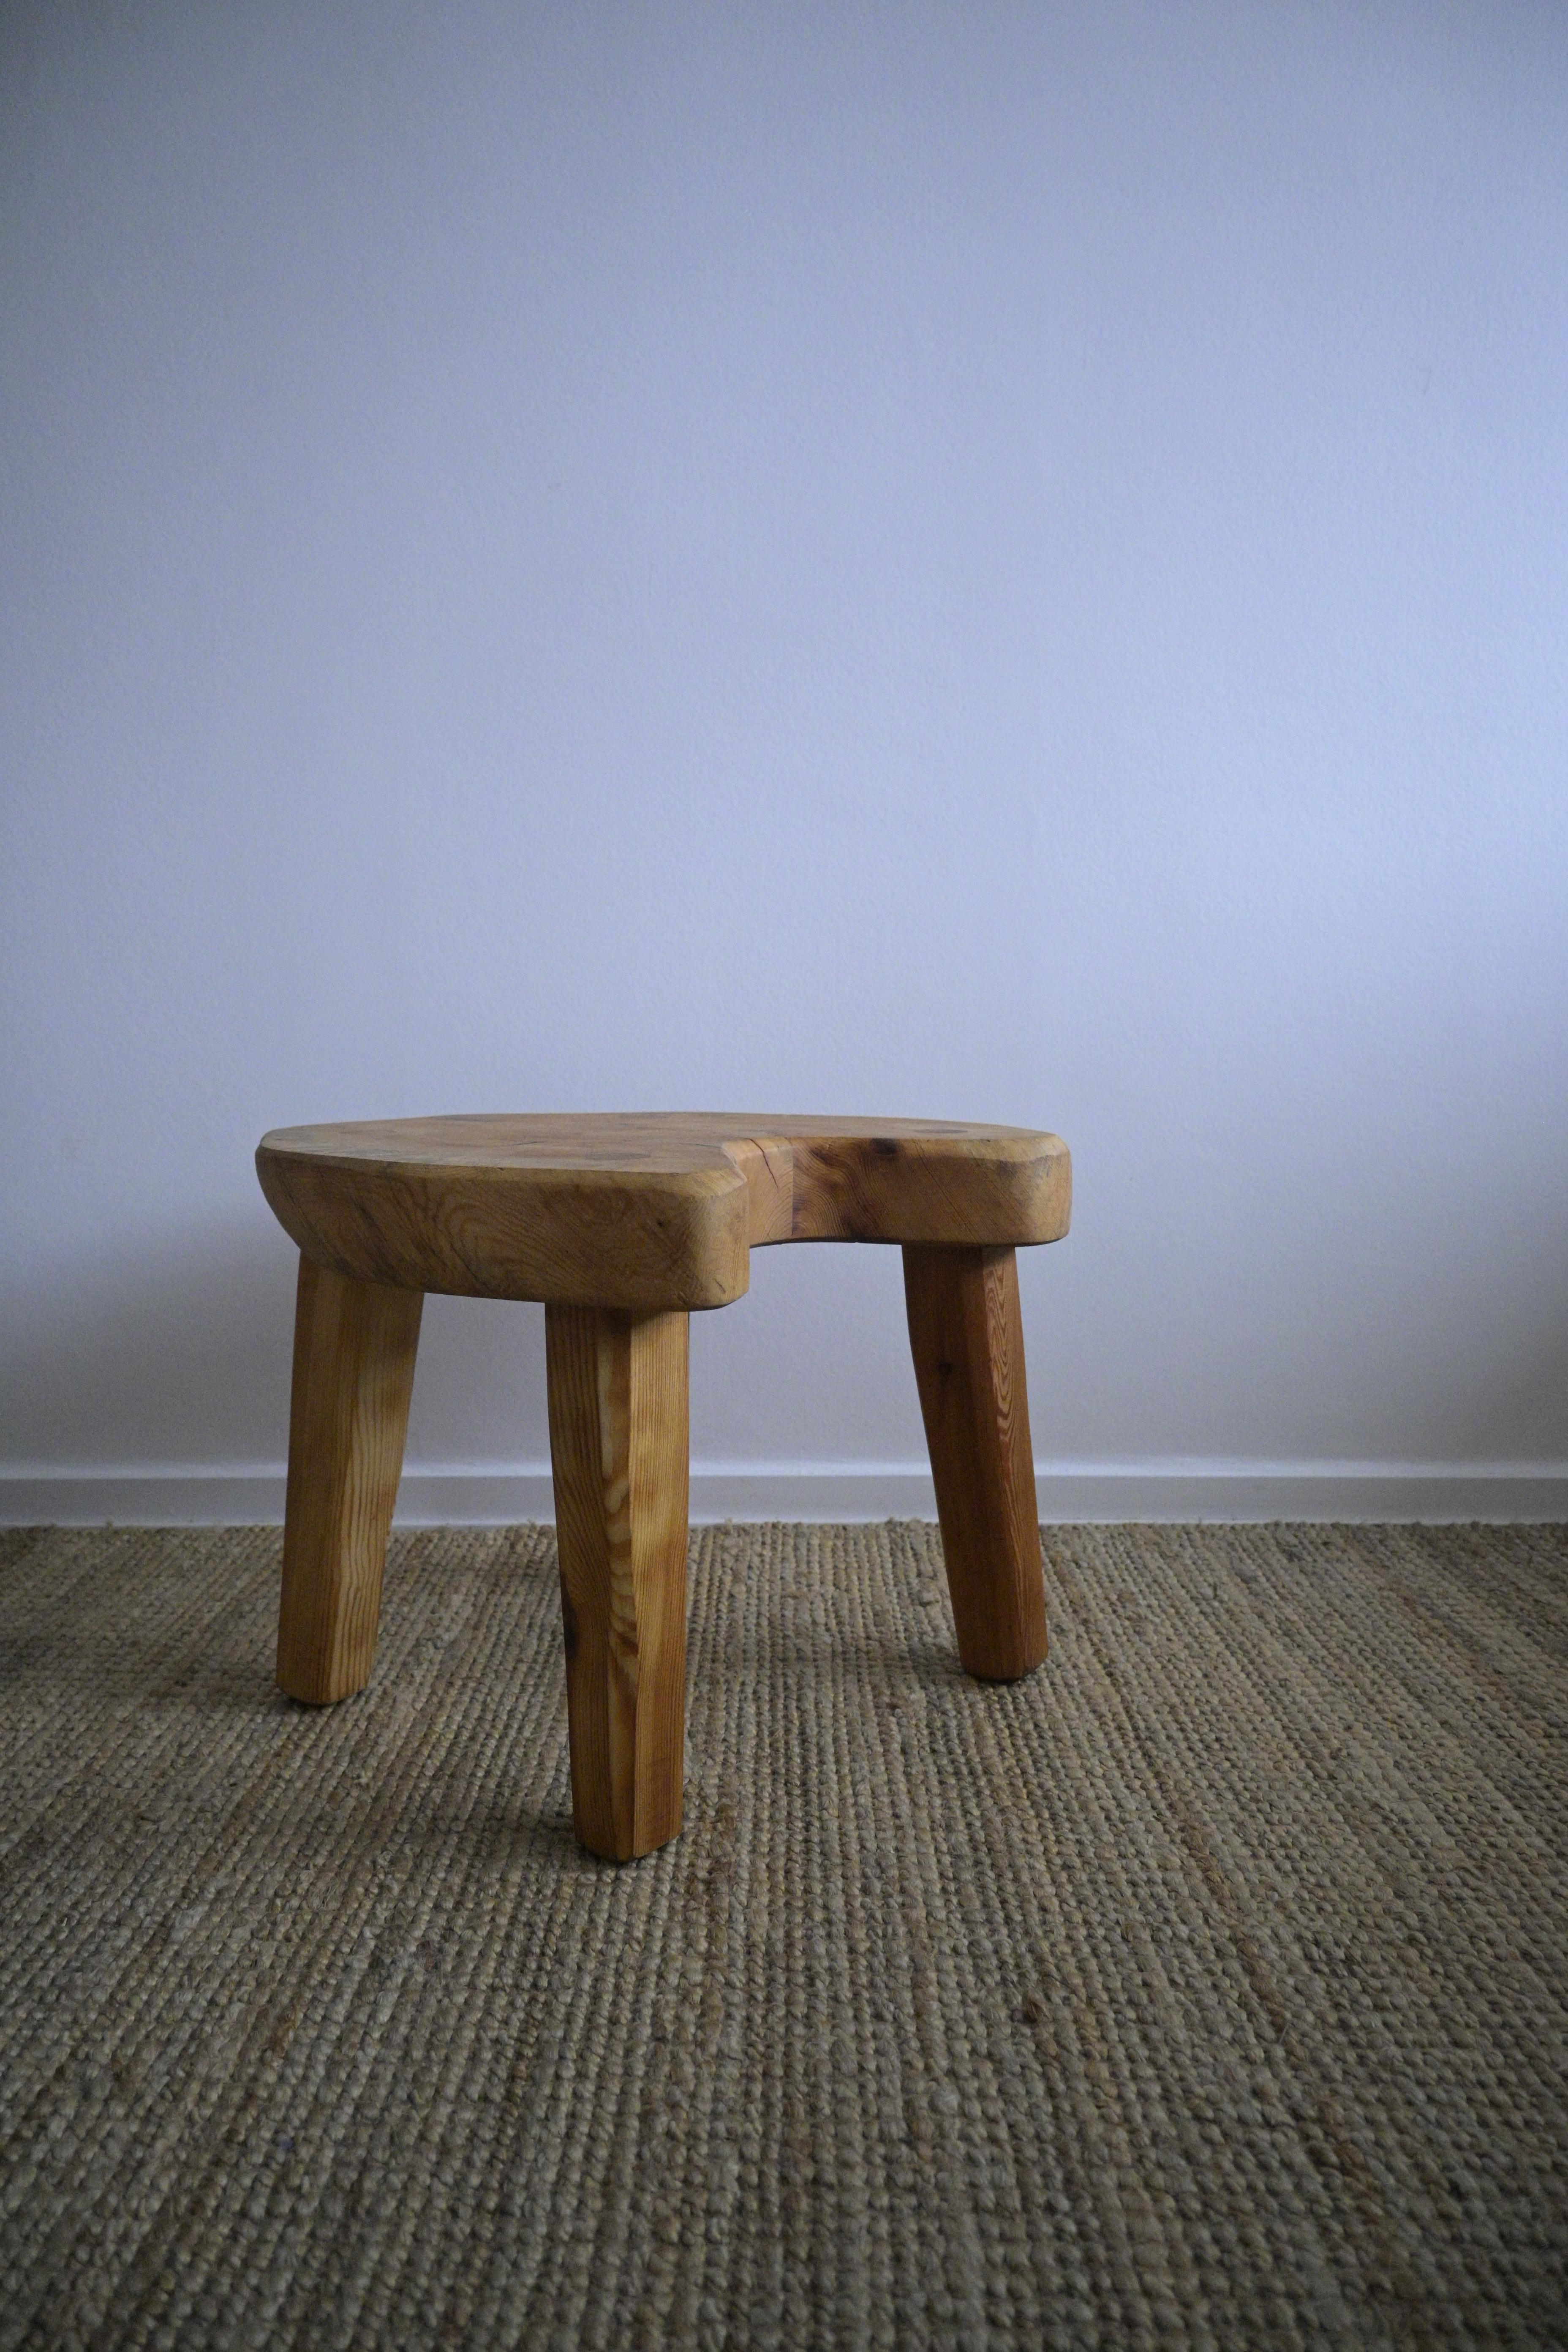 Stool/Side table with chunky legs by Stig Sandqvist, Vemdalia Company, Sweden 1960

Made in pine wood.

It has been widened, so now the size is larger than it was before.

Gently restored to its current condition.

Height: 37 cm/14.5 inch
Width: 52